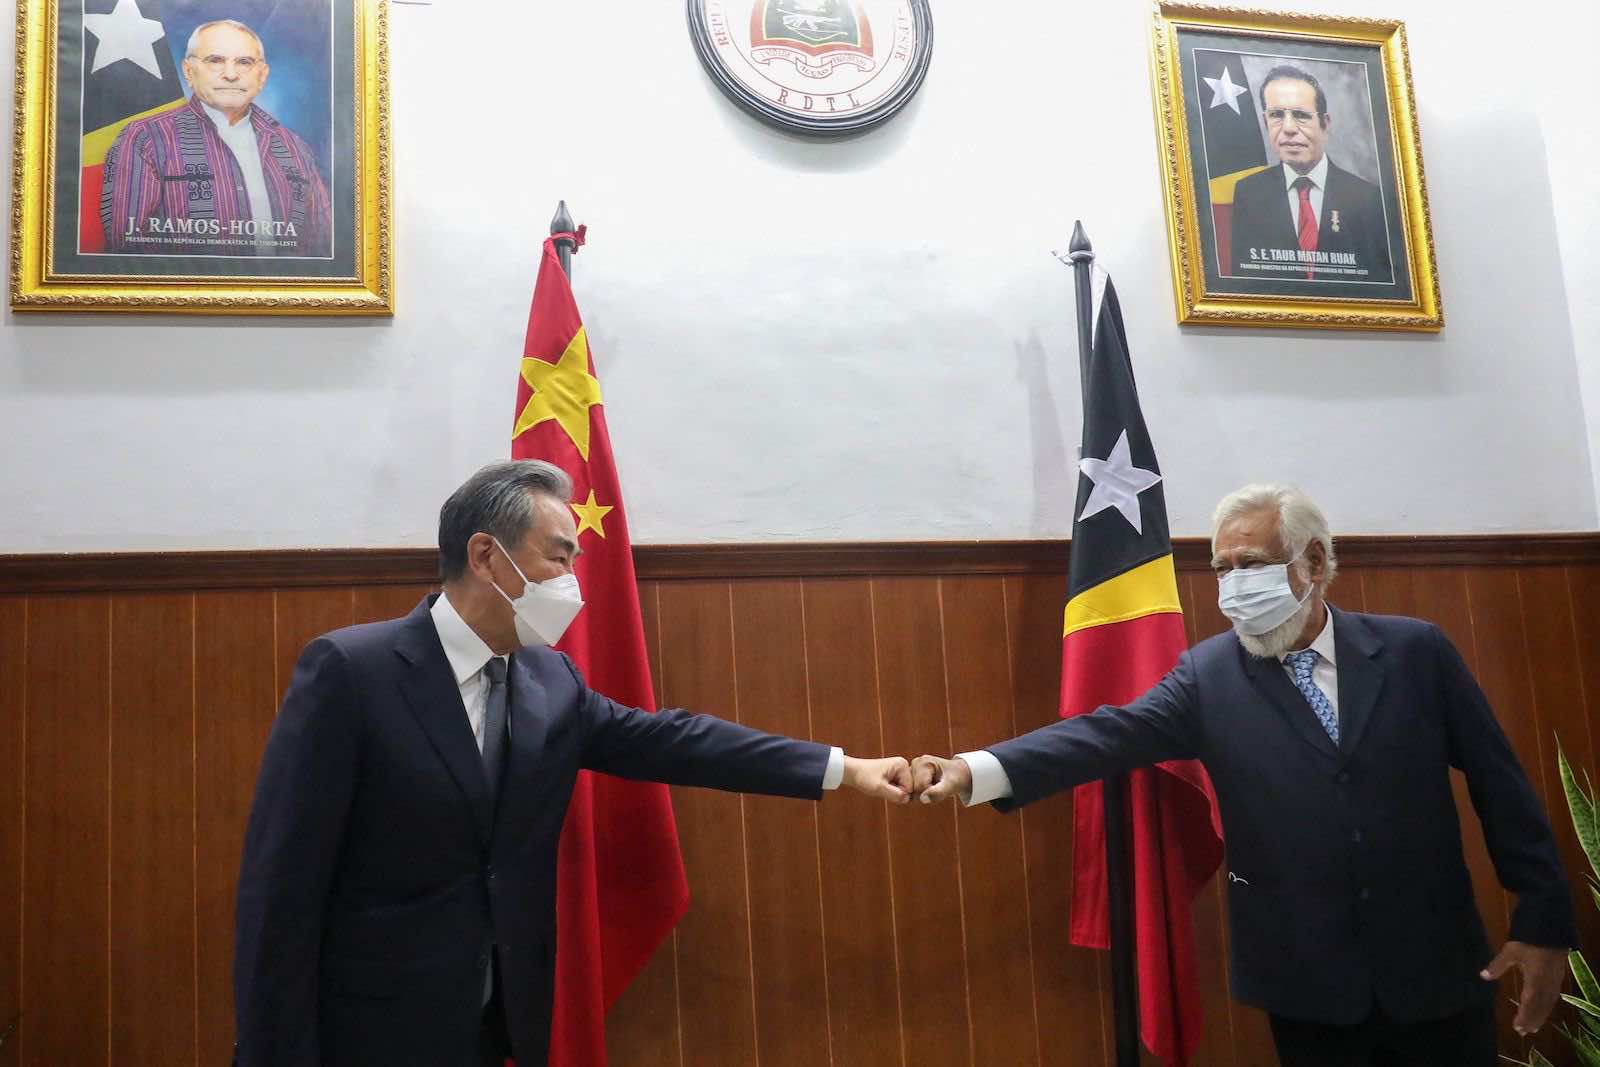 East Timor’s former leader Xanana Gusmao (right) greets China’s Foreign Minister Wang Yi during a meeting in Dili on 4 June (Valentino Dariel Sousa/AFP via Getty Images)